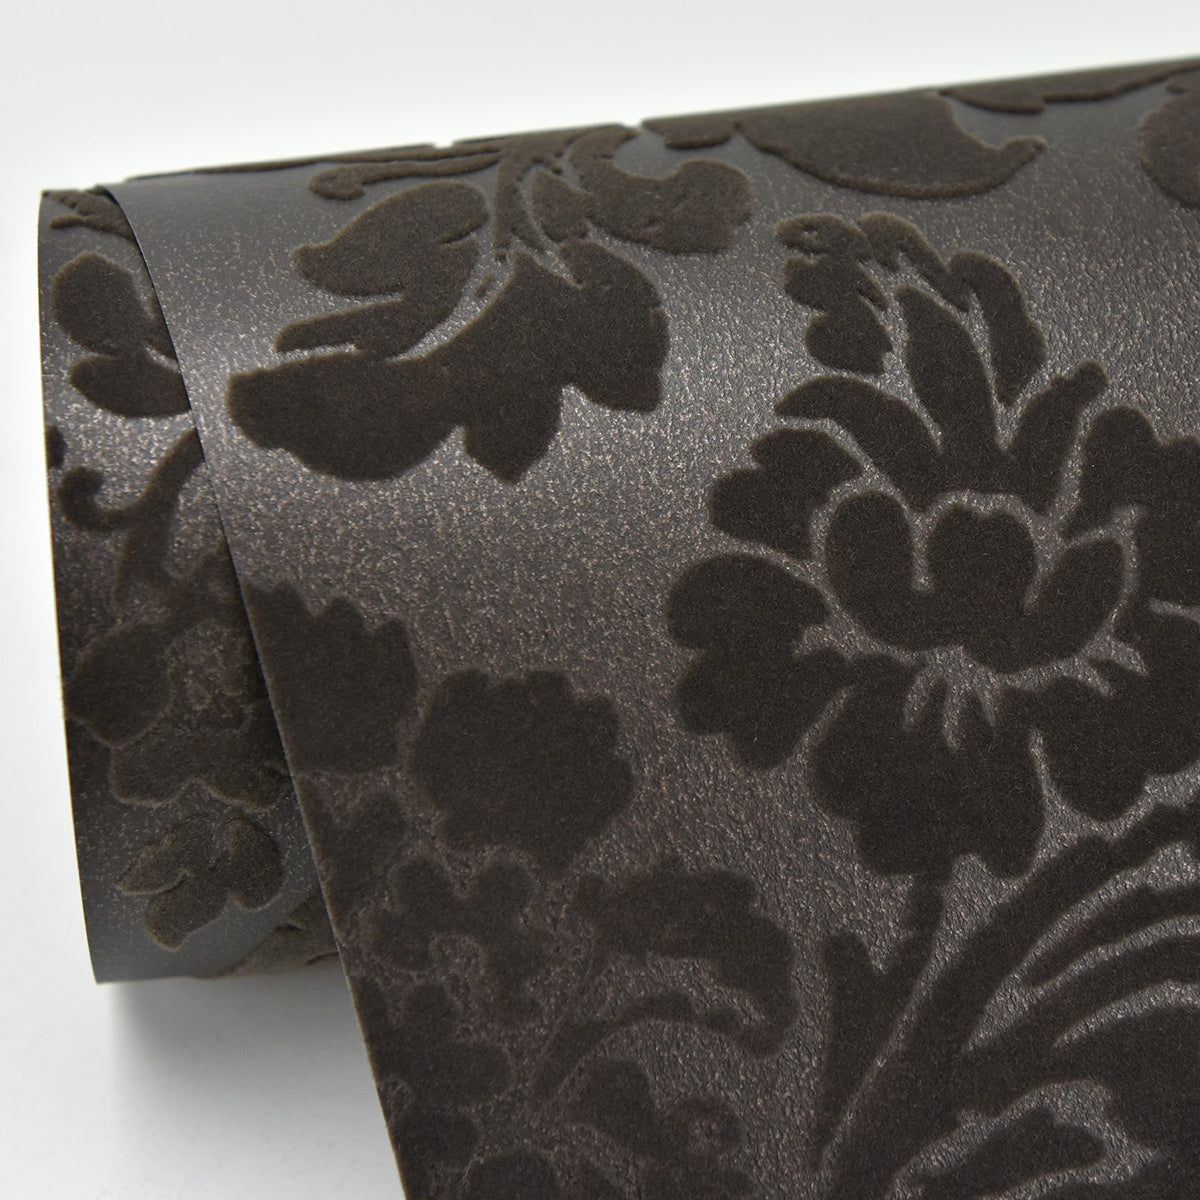 2763-87311 Shadow Brown Flocked Damask Wallpaper By Brewster